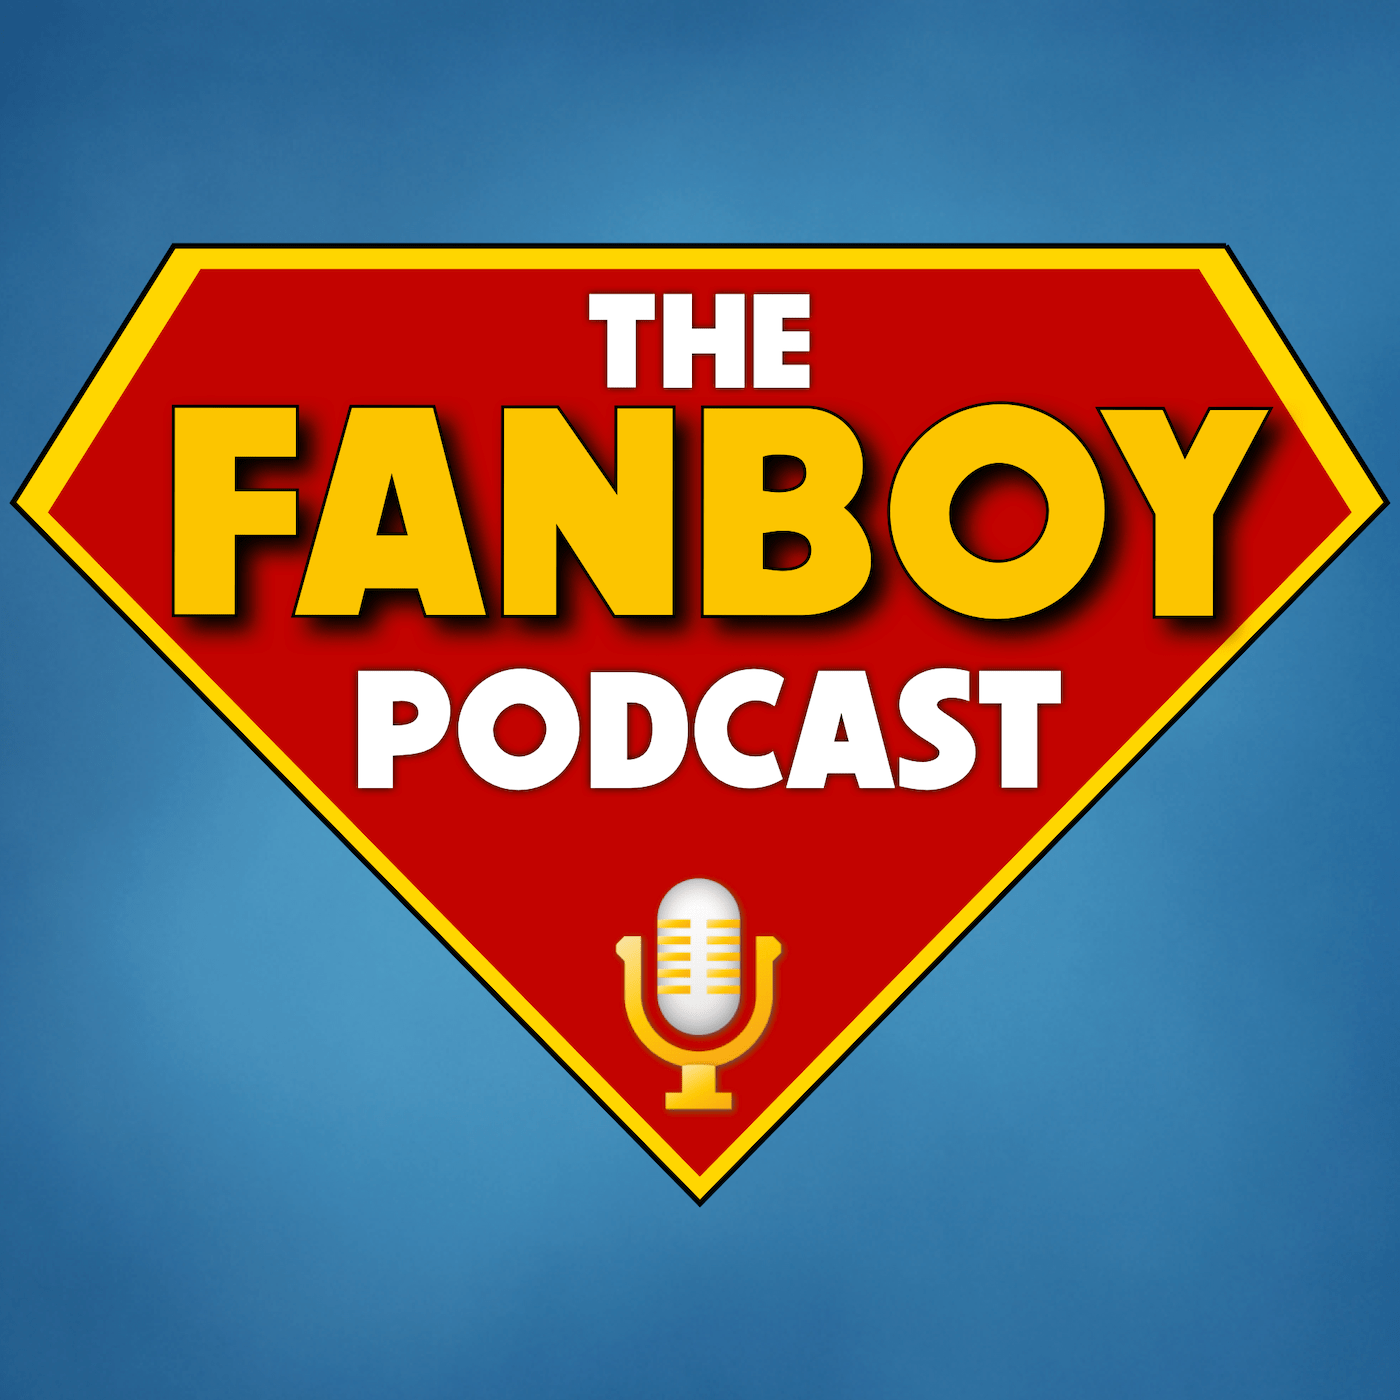 The Fanboy Podcast